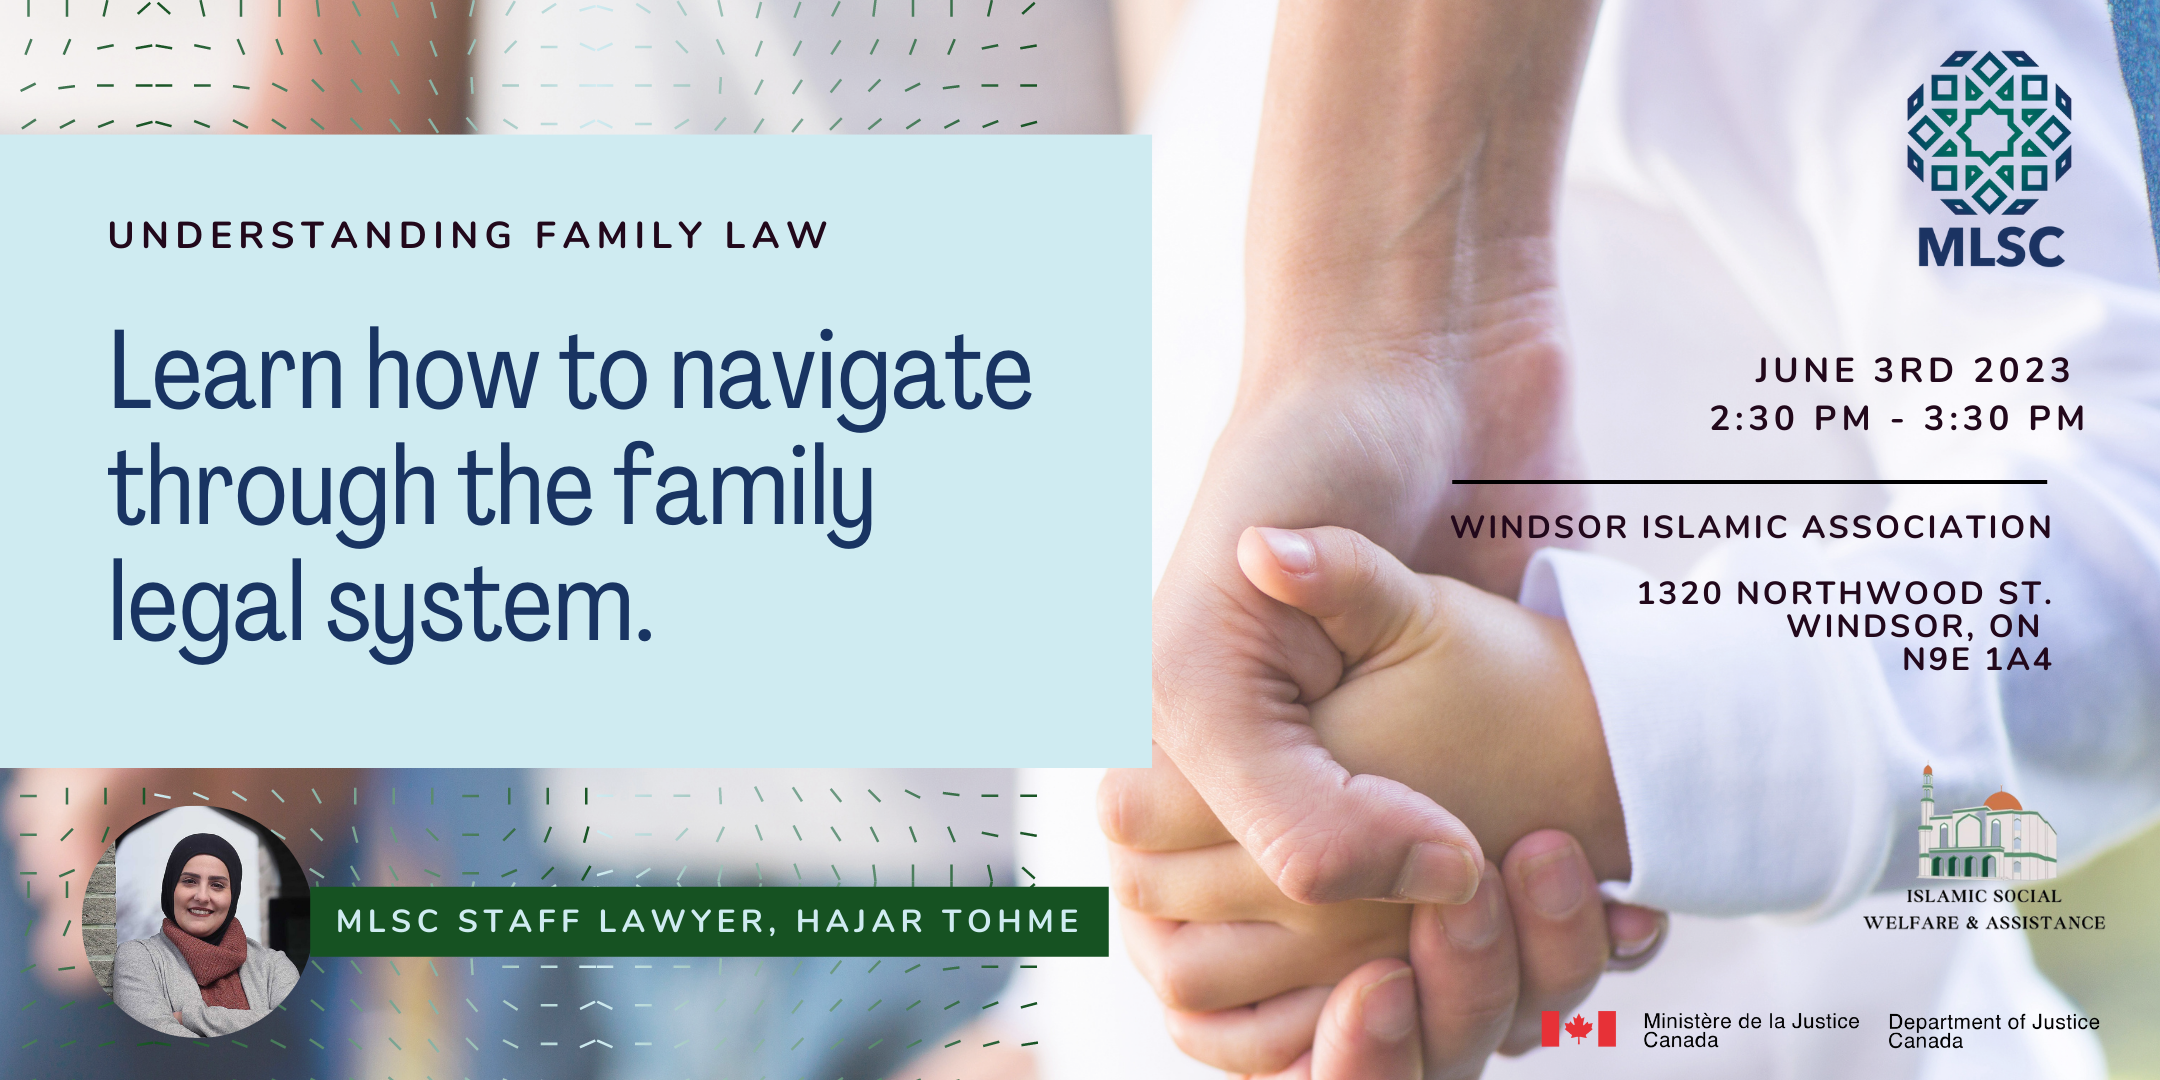 Muslim Legal Support Centre (MLSC): Navigating the Family Legal System